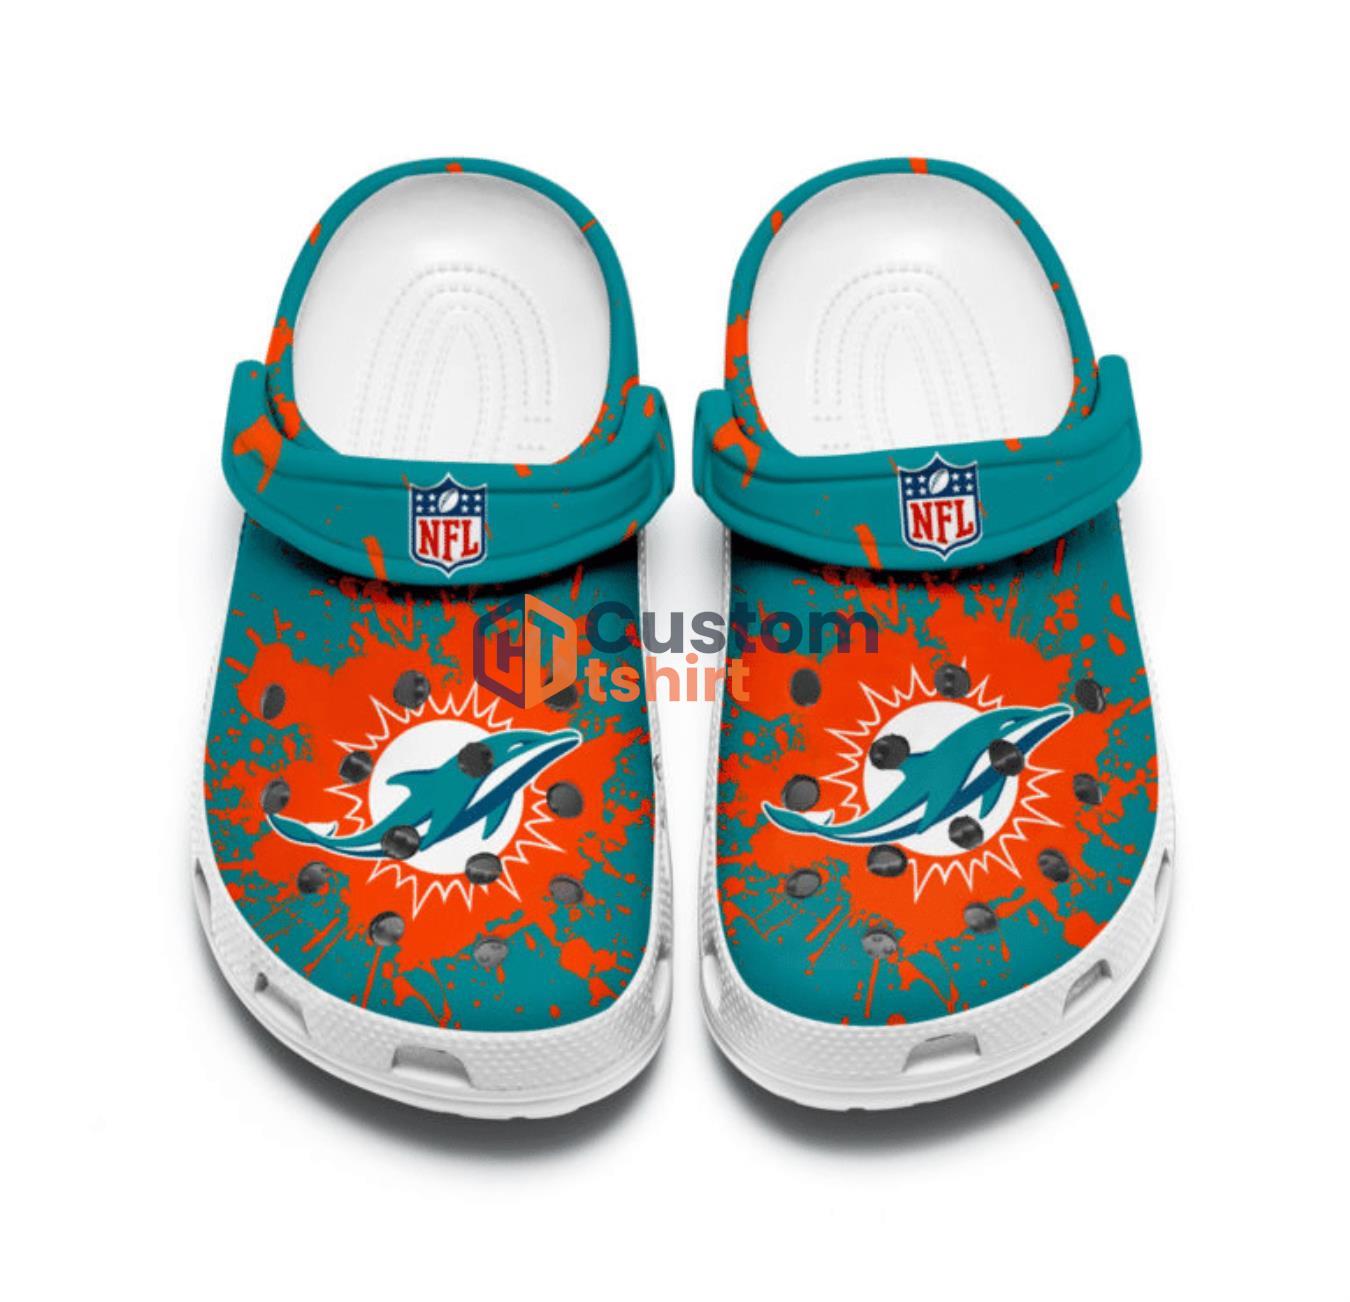 Miami Dolphins Clog Shoes Custom 171001Cr Clog Shoes band Comfortable For Mens And Womens Product Photo 3 Product photo 2